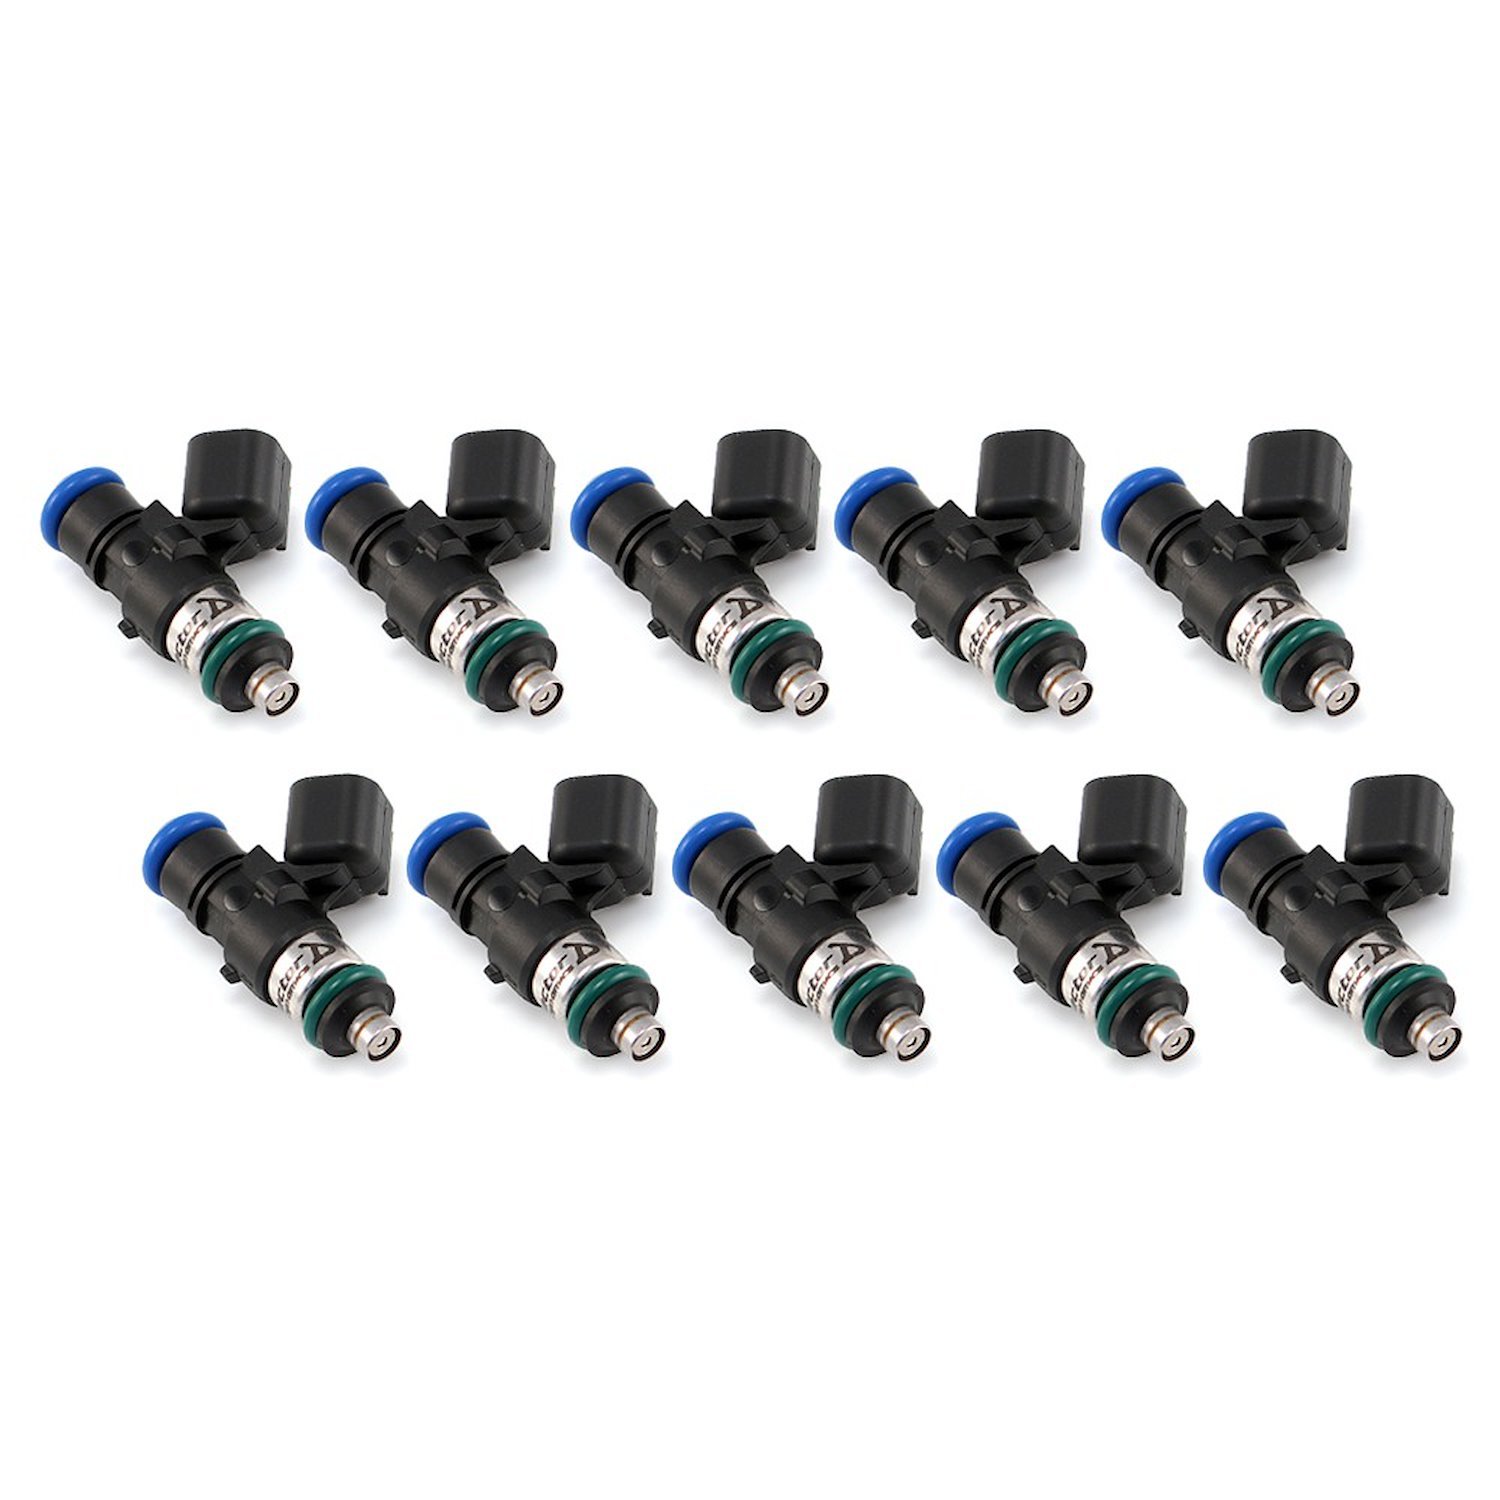 2600.34.14.14.10 2600cc Fuel Injector Set, 34 mm Length, 14 mm Top, 14 mm Lower O-Ring